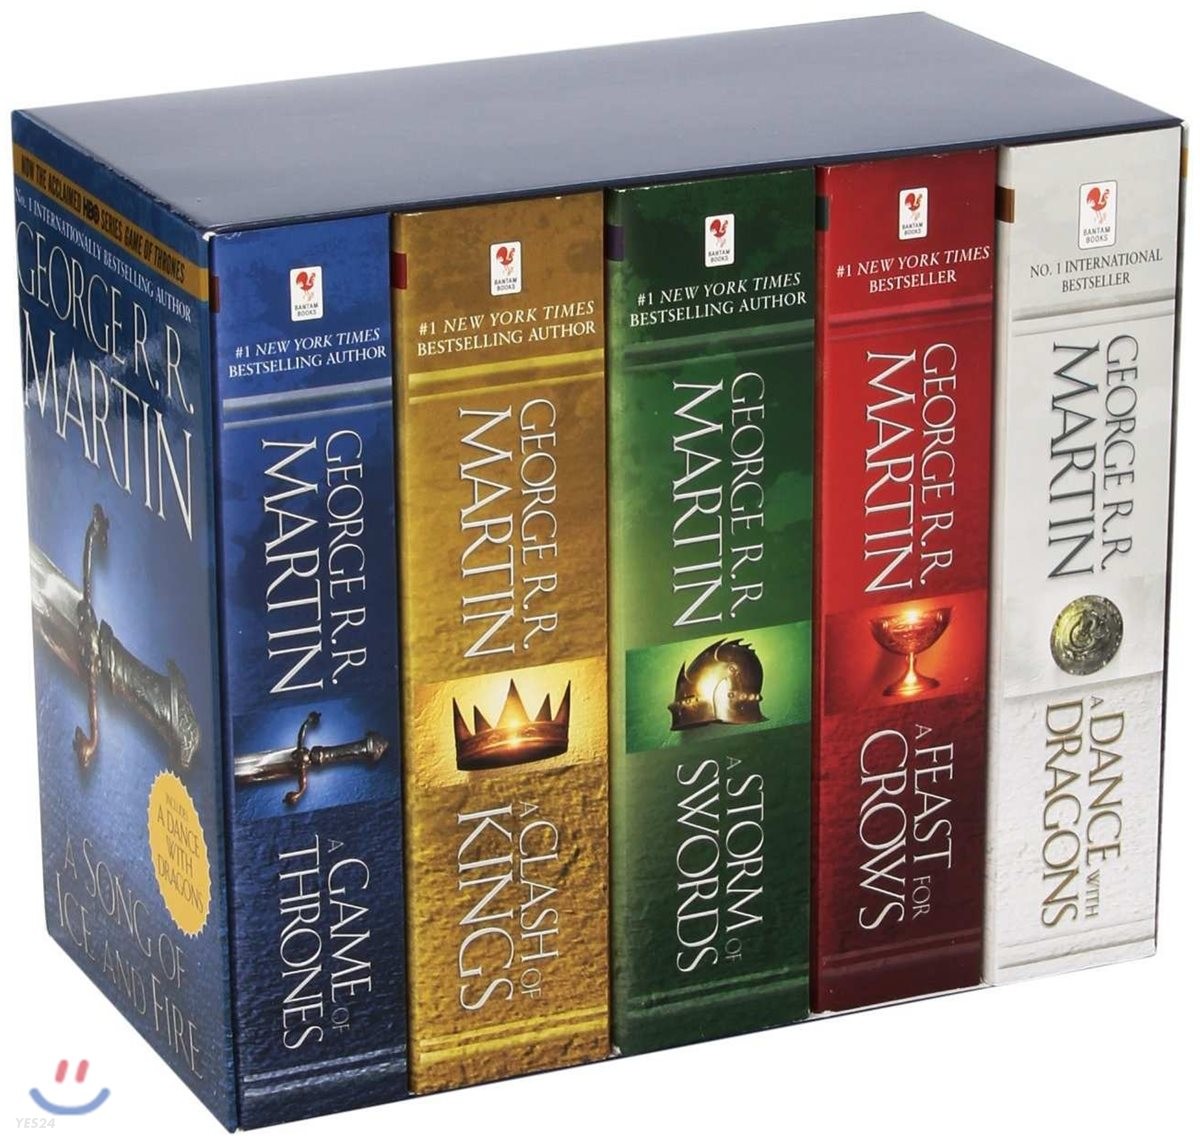 A Song of Ice and Fire : 1-5 Boxed Set 얼음과 불의 노래 5권 박스 세트 (A Game of Thrones, A Clash of Kings, A Storm of Swords, A Feast for Crows, and A  Dance with Dragons)